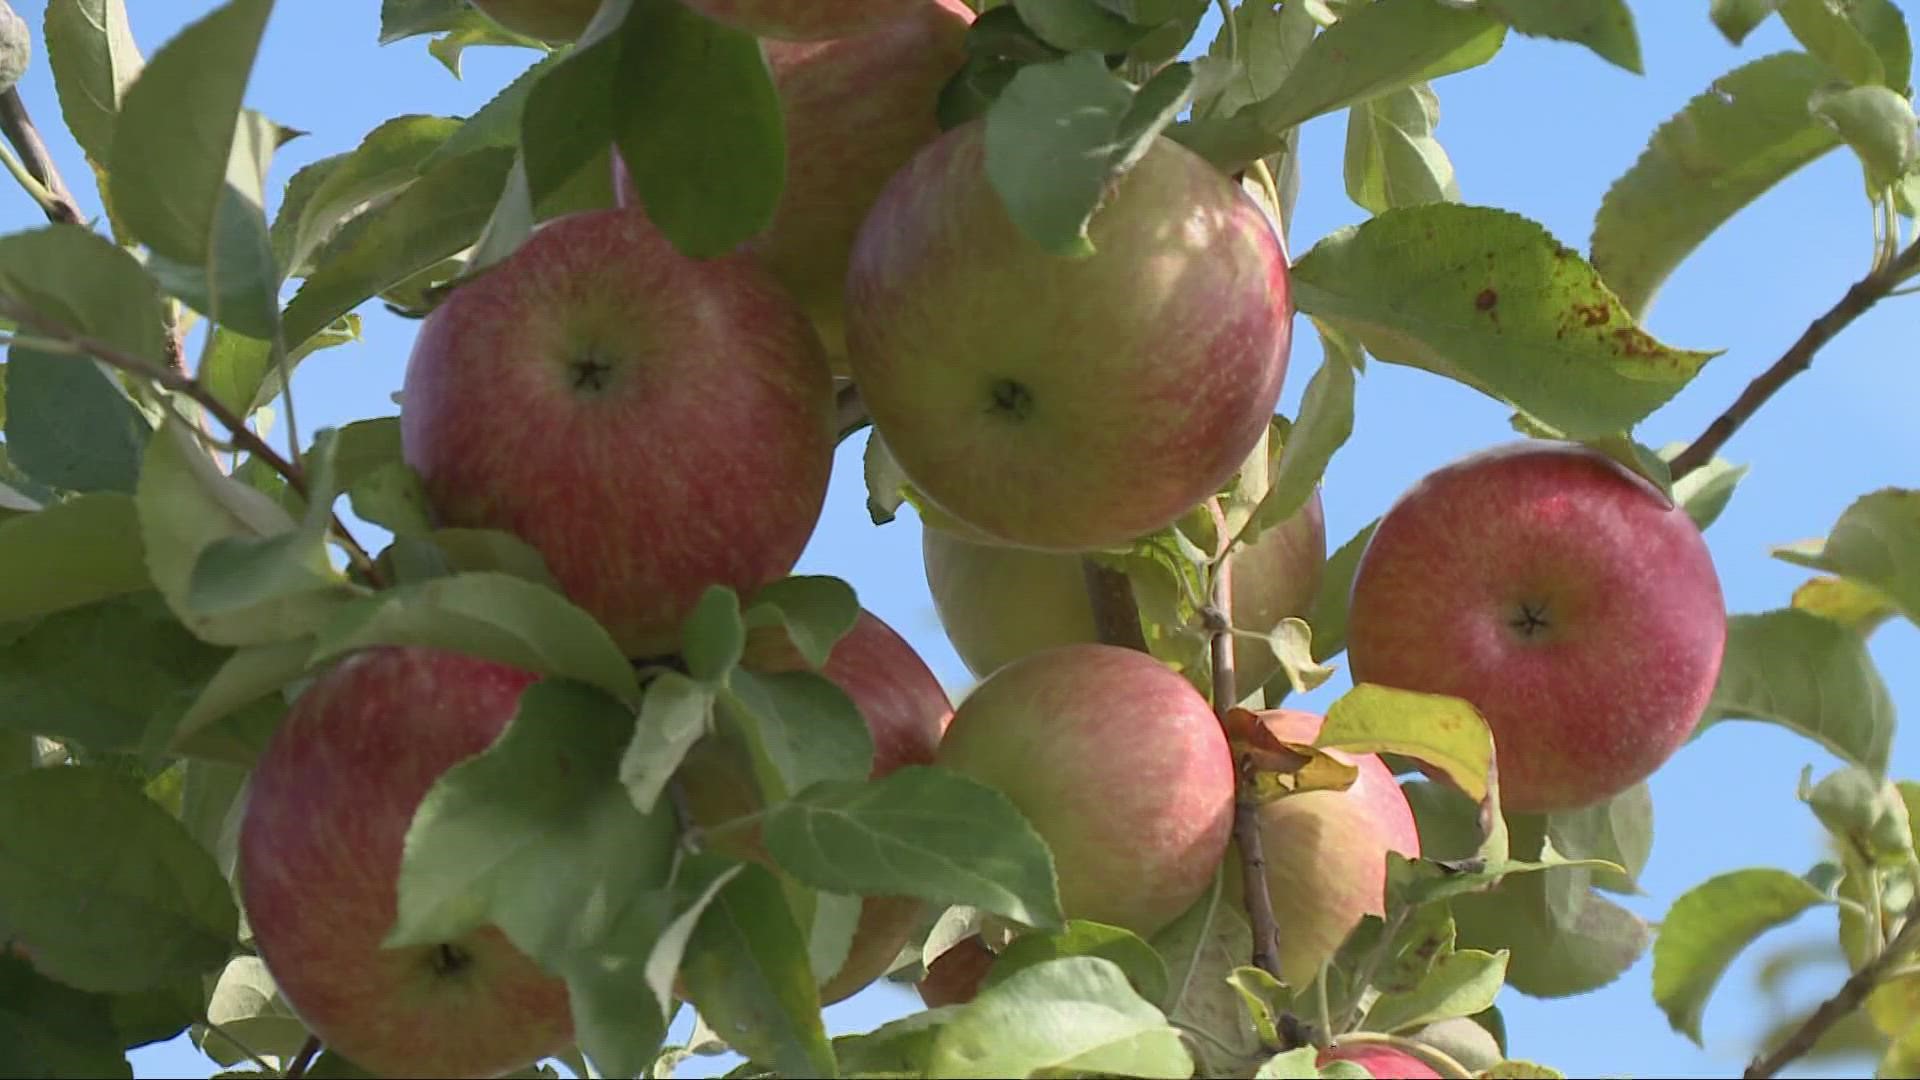 Rittman Orchards is offering pick-your-own for Honeycrisp apples this weekend, with more varieties later in September.